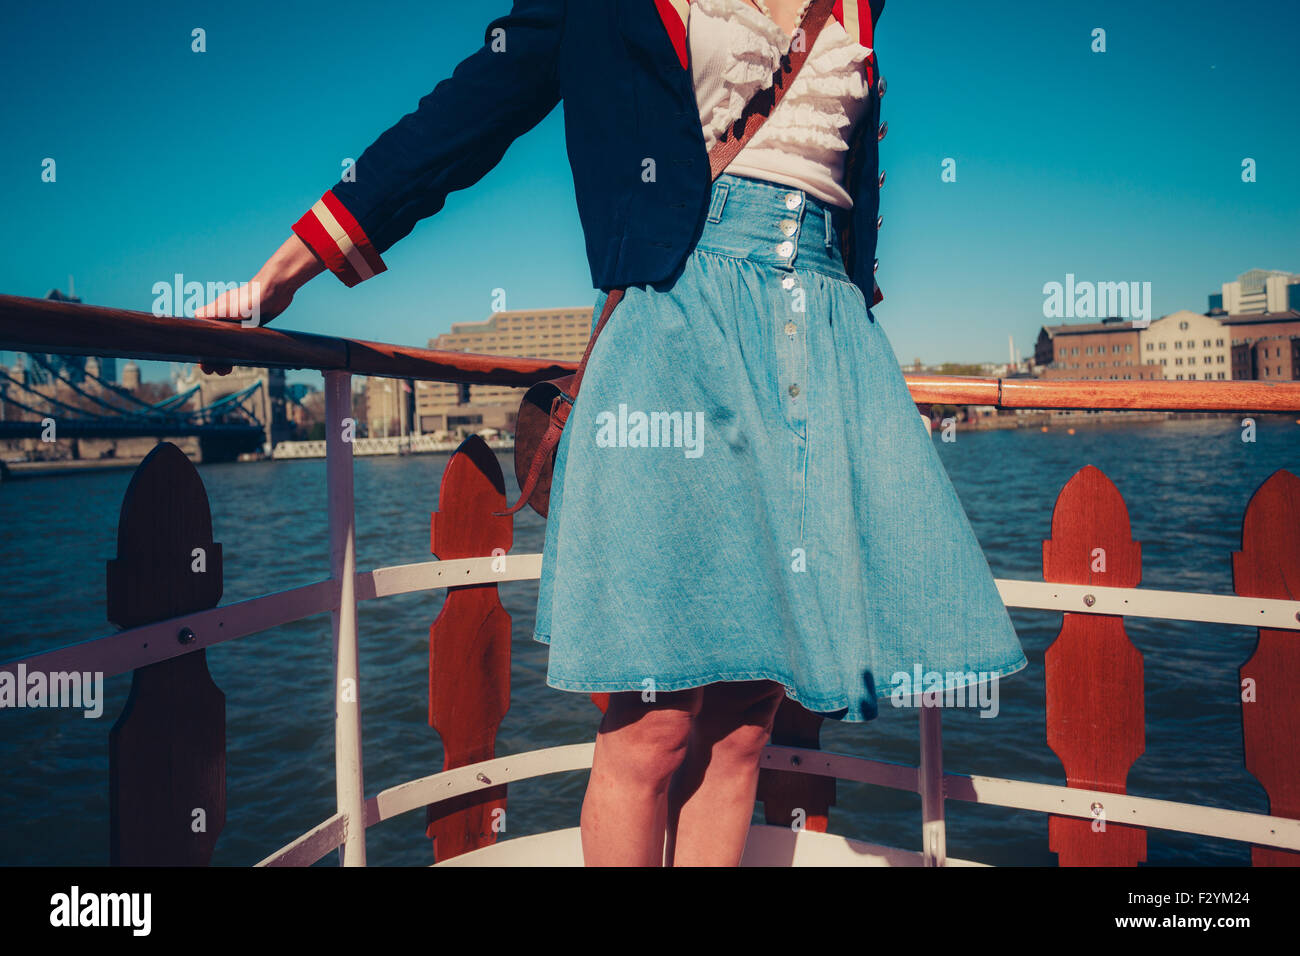 A young woman's skirt is blowing in the wind as she is standing on the deck of a boat cruising down the river Stock Photo